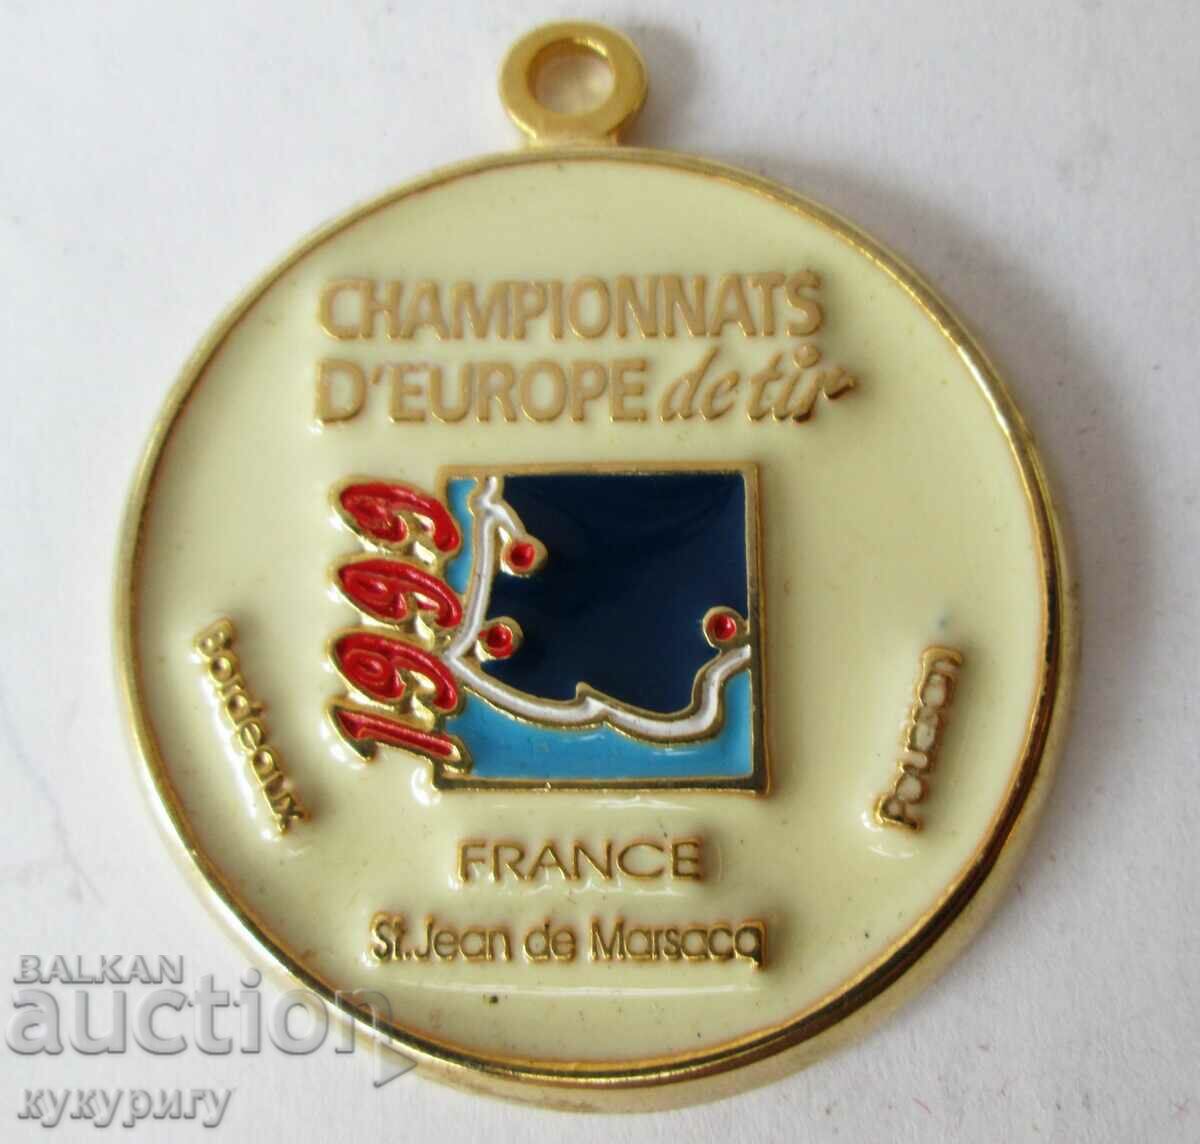 Medal from the European shooting championship France 1999